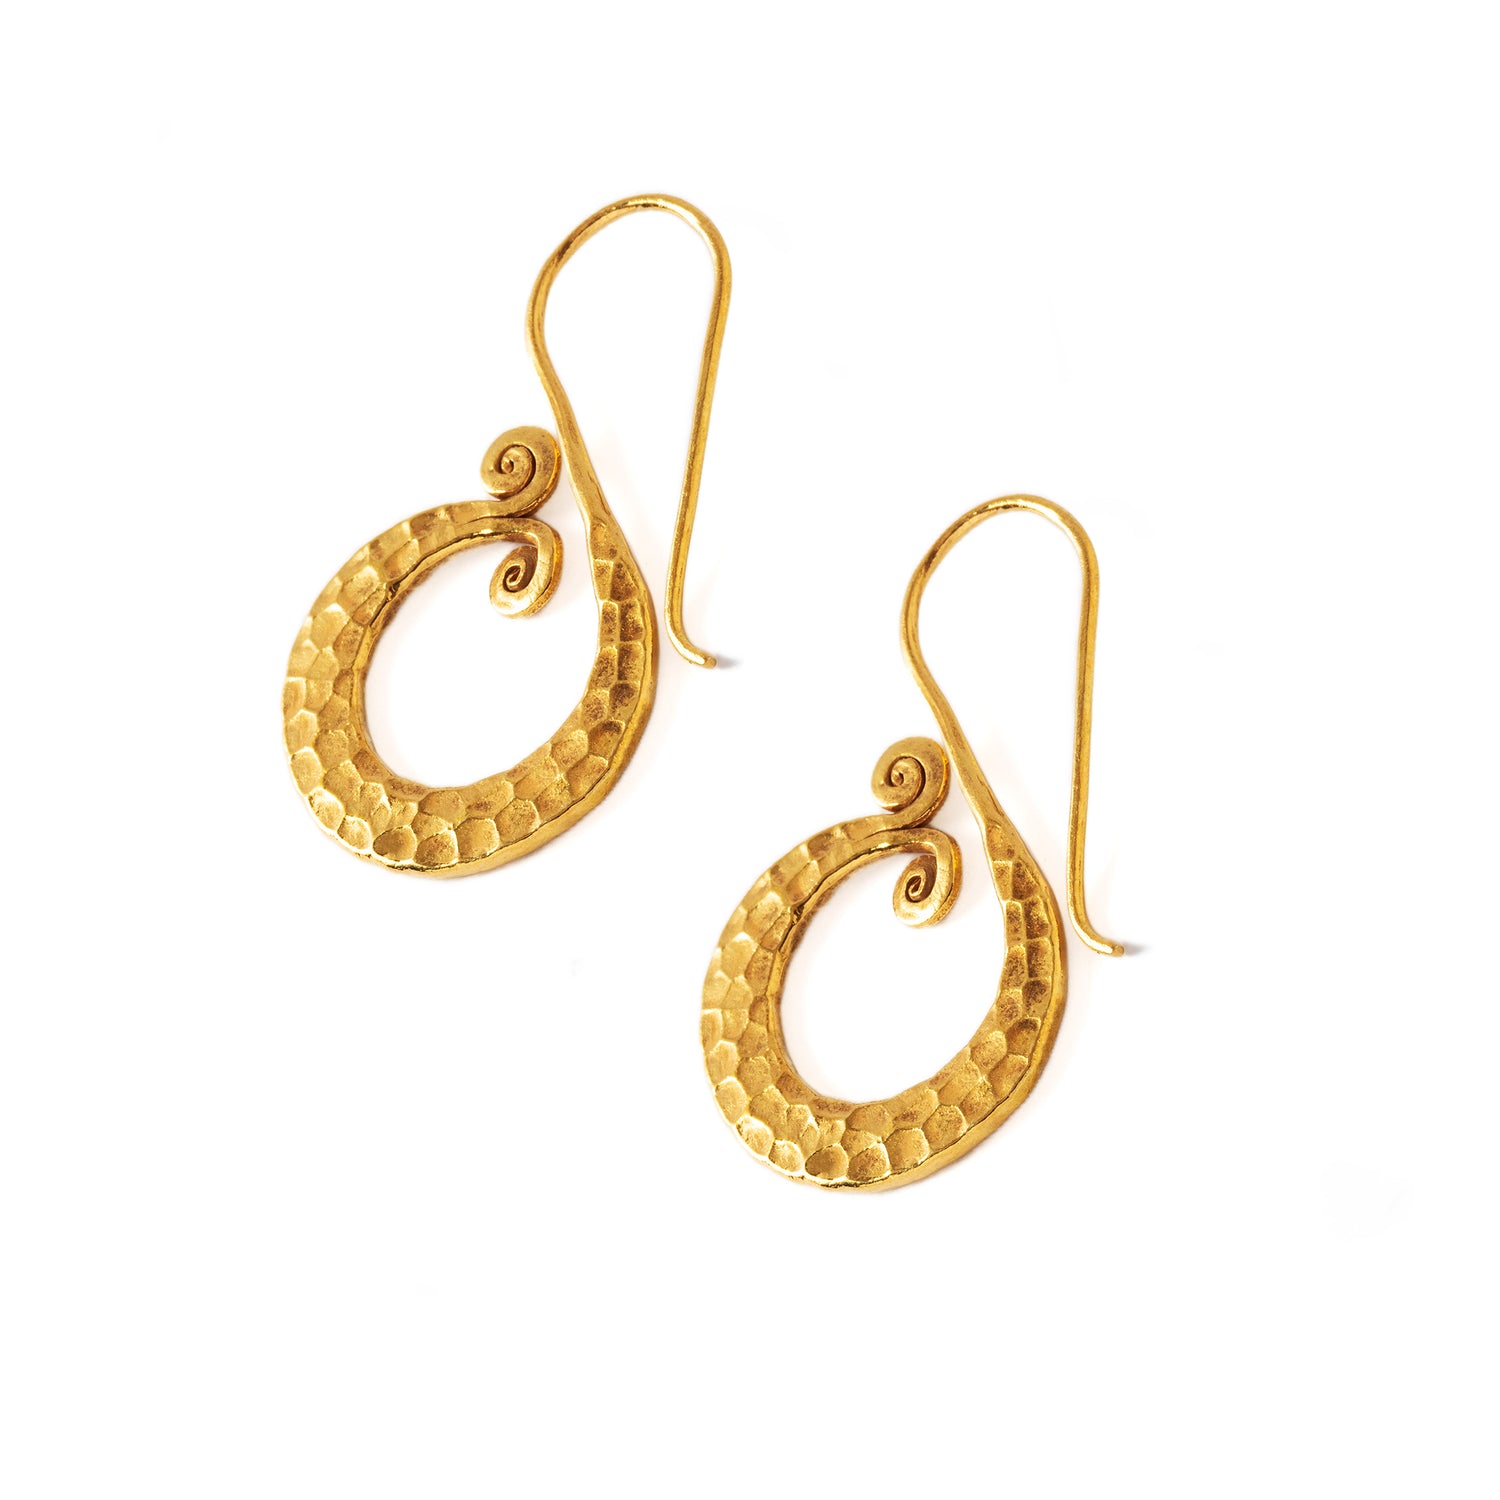 Hammered Gold Fishtail Tribal Earrings right side view